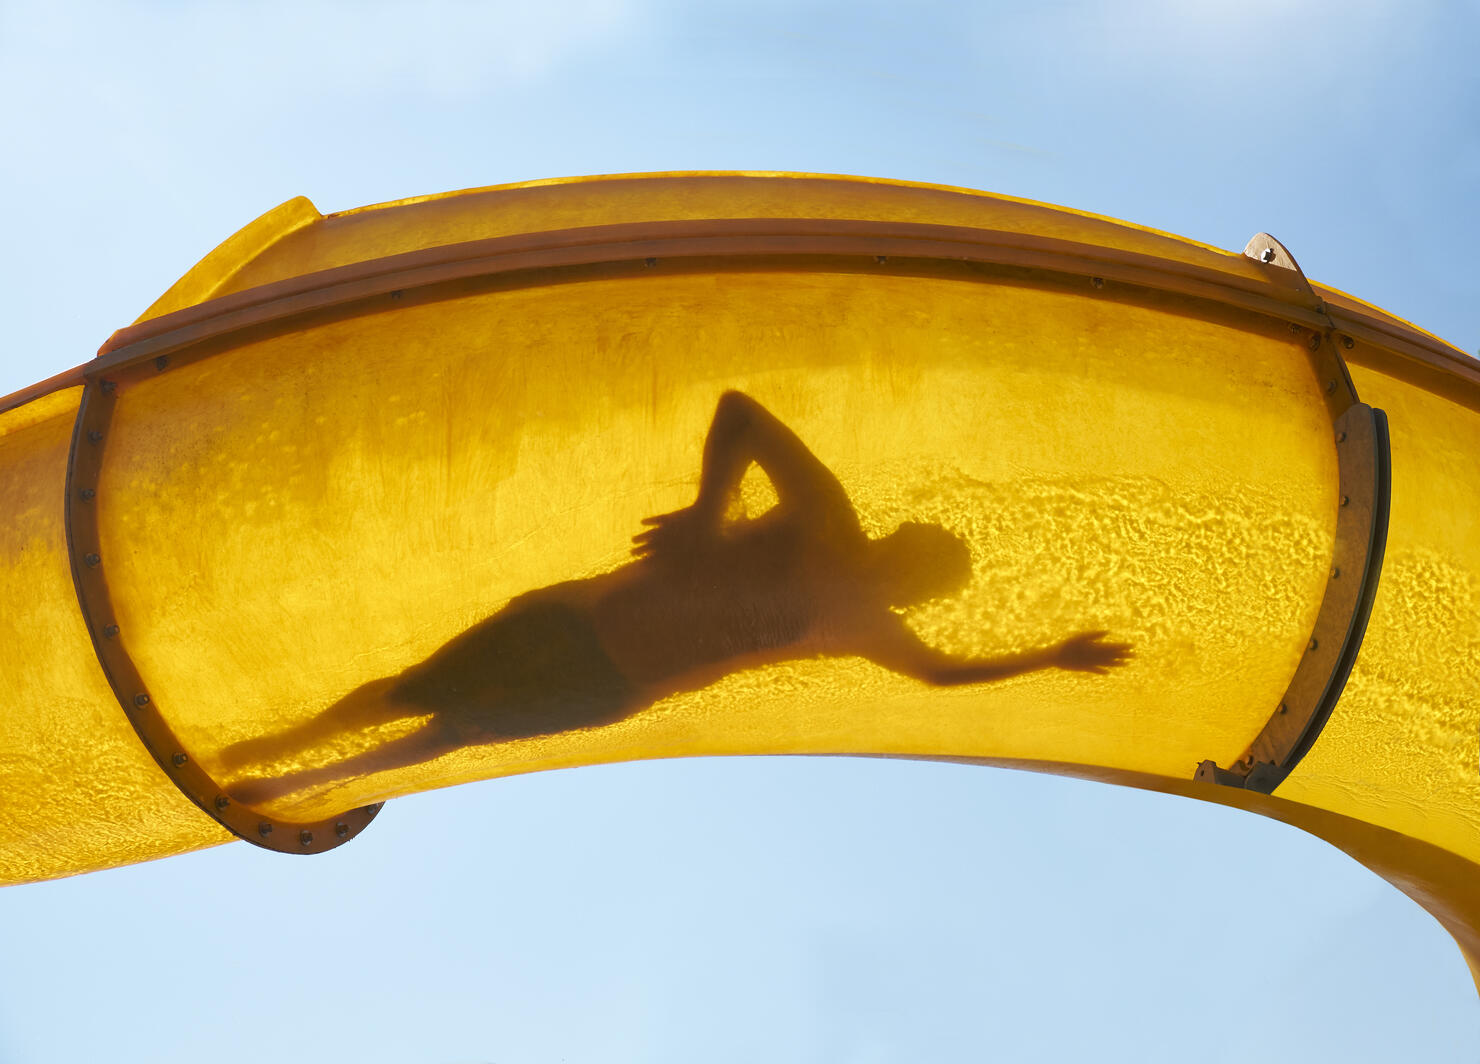 Silhouette of person sliding down water slide